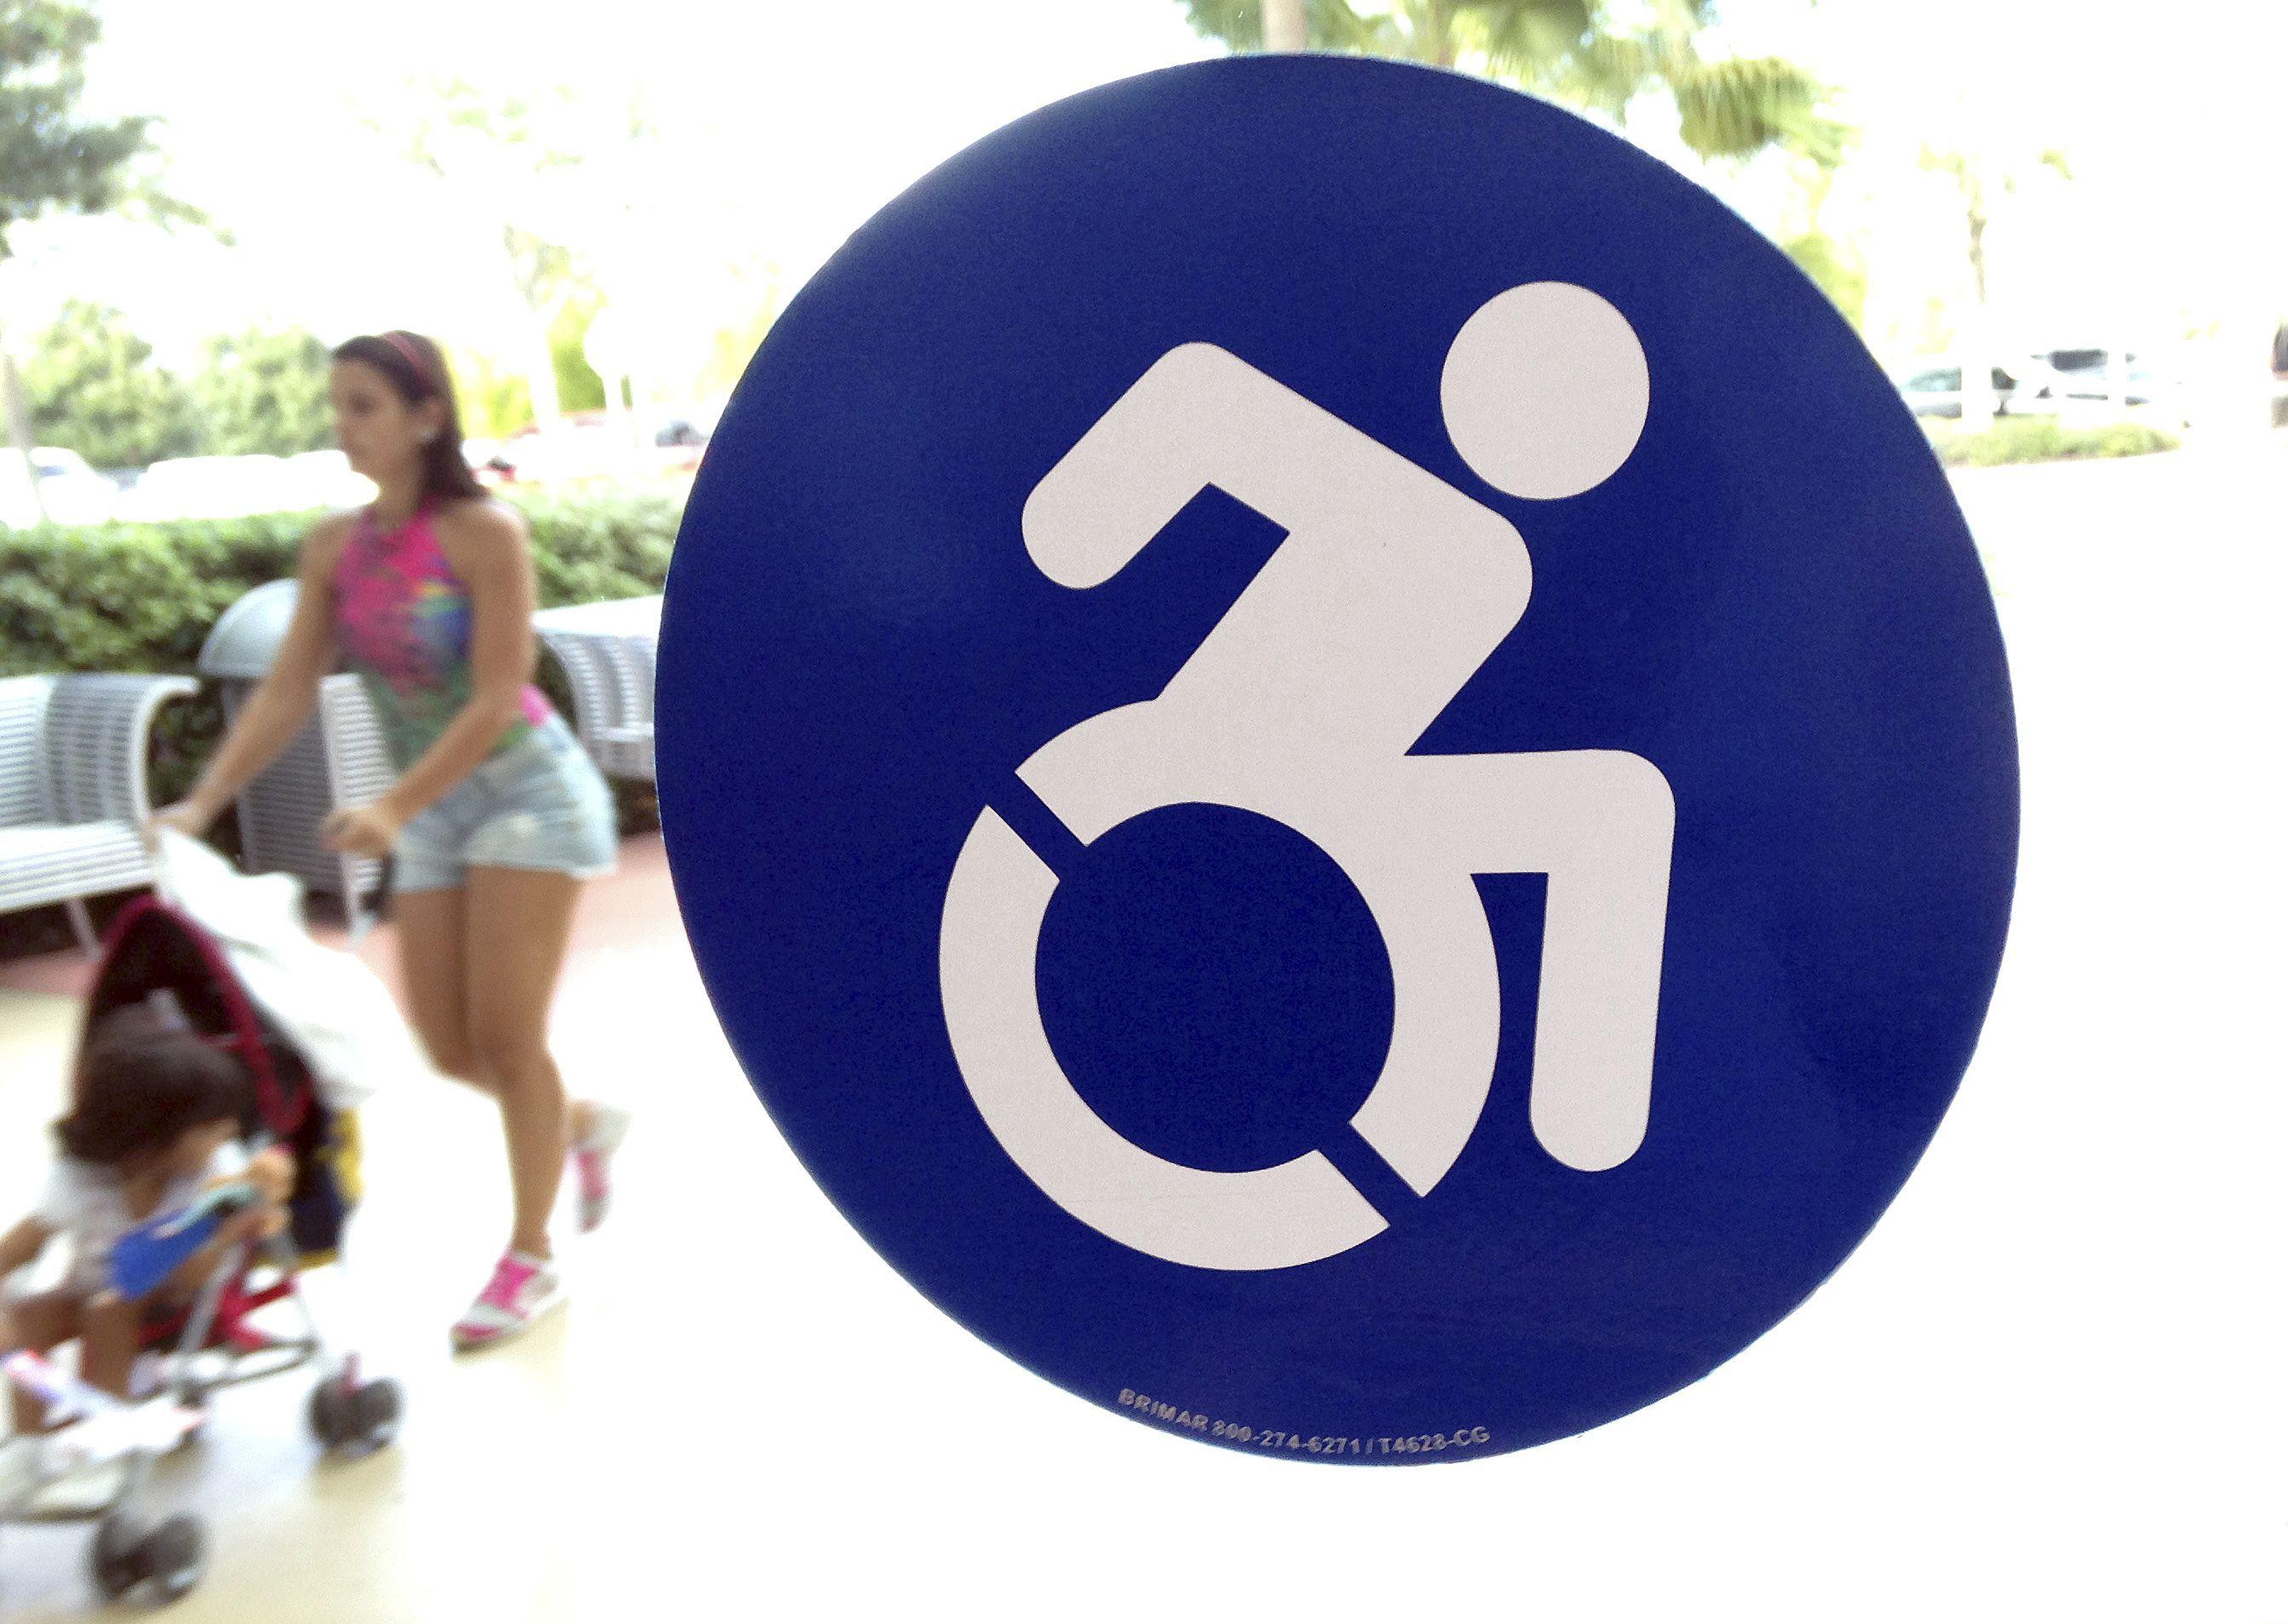 Hanicap Logo - Handicapped symbol getting a makeover - and resistance - CBS News